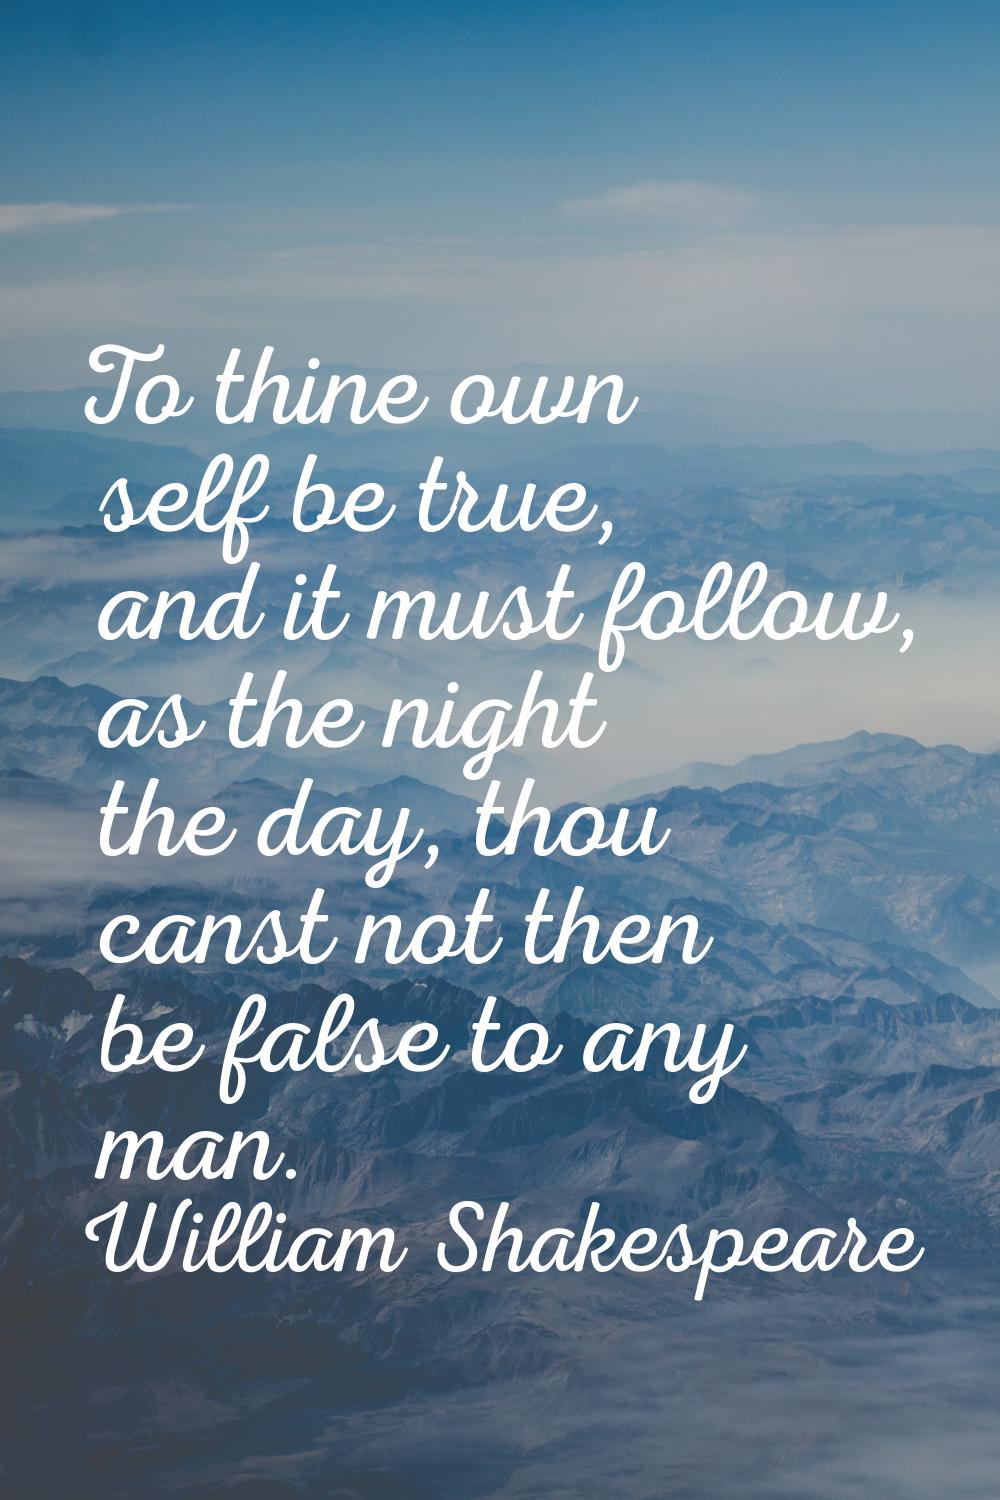 To thine own self be true, and it must follow, as the night the day, thou canst not then be false t